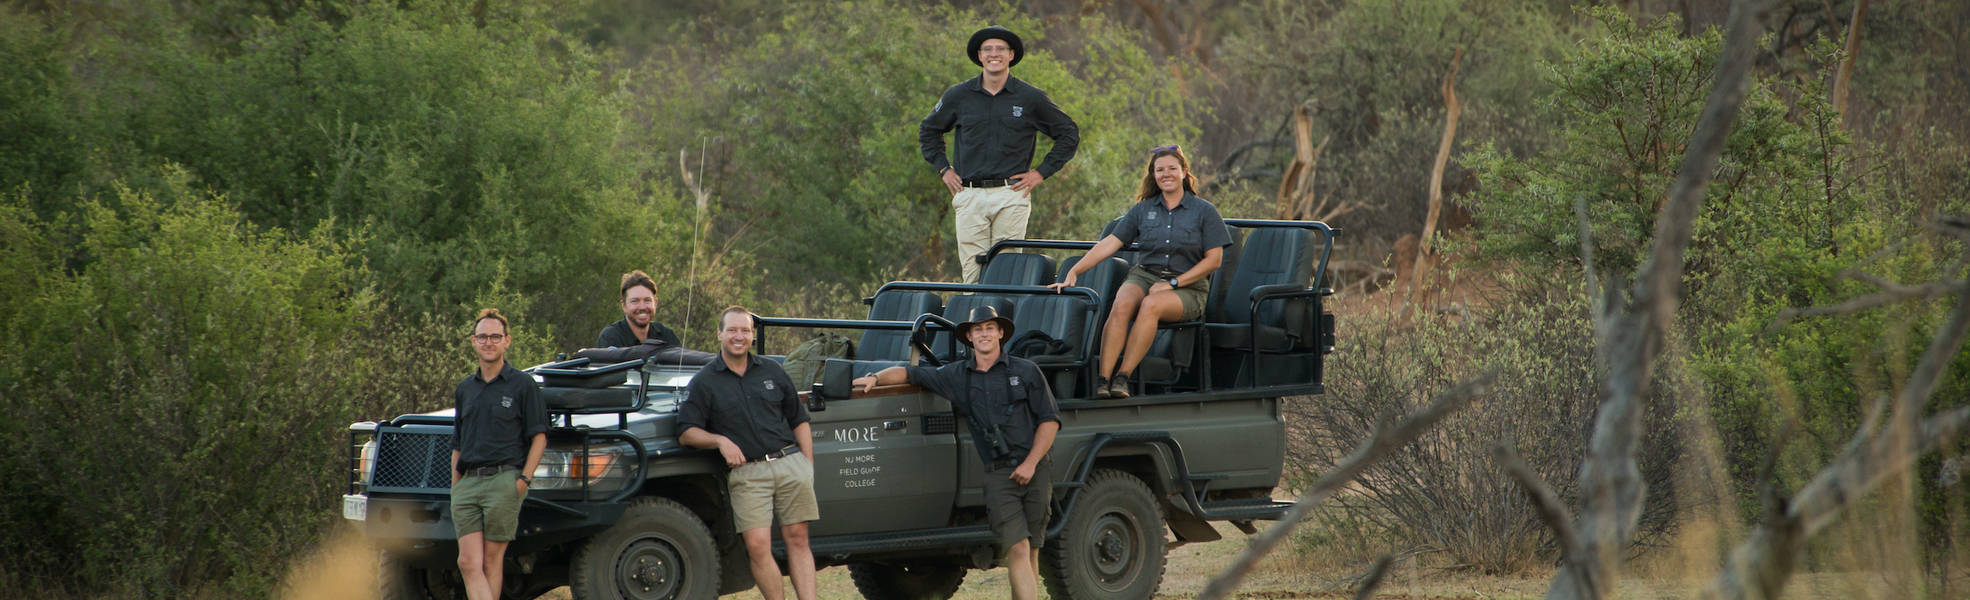 Three month Ranger training in South Africa